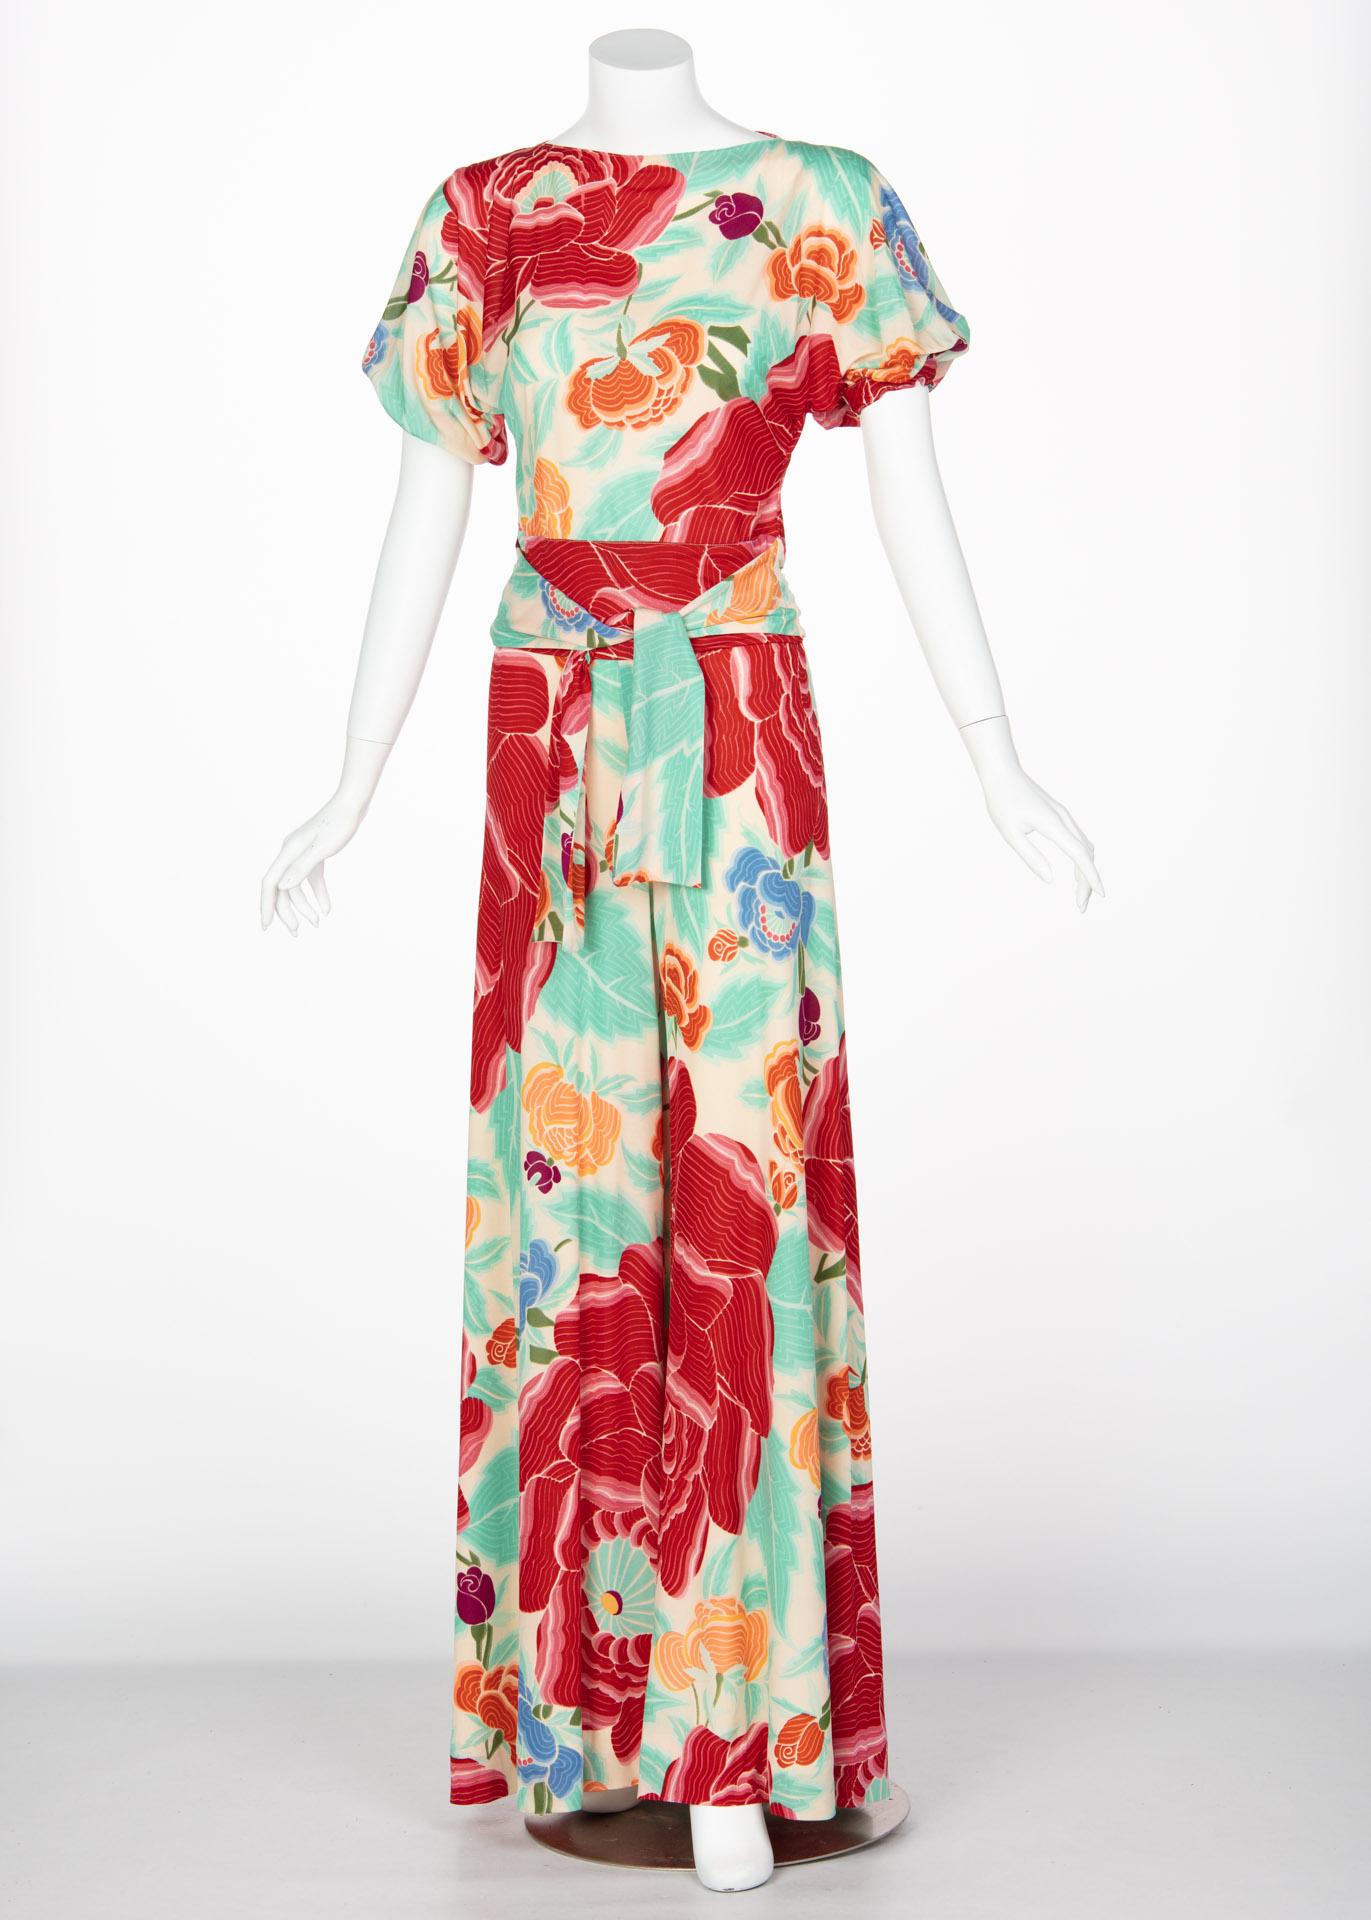 Missoni Multicolored Floral Print Top Palazzo Pant Set, 1970s  In Excellent Condition For Sale In Boca Raton, FL